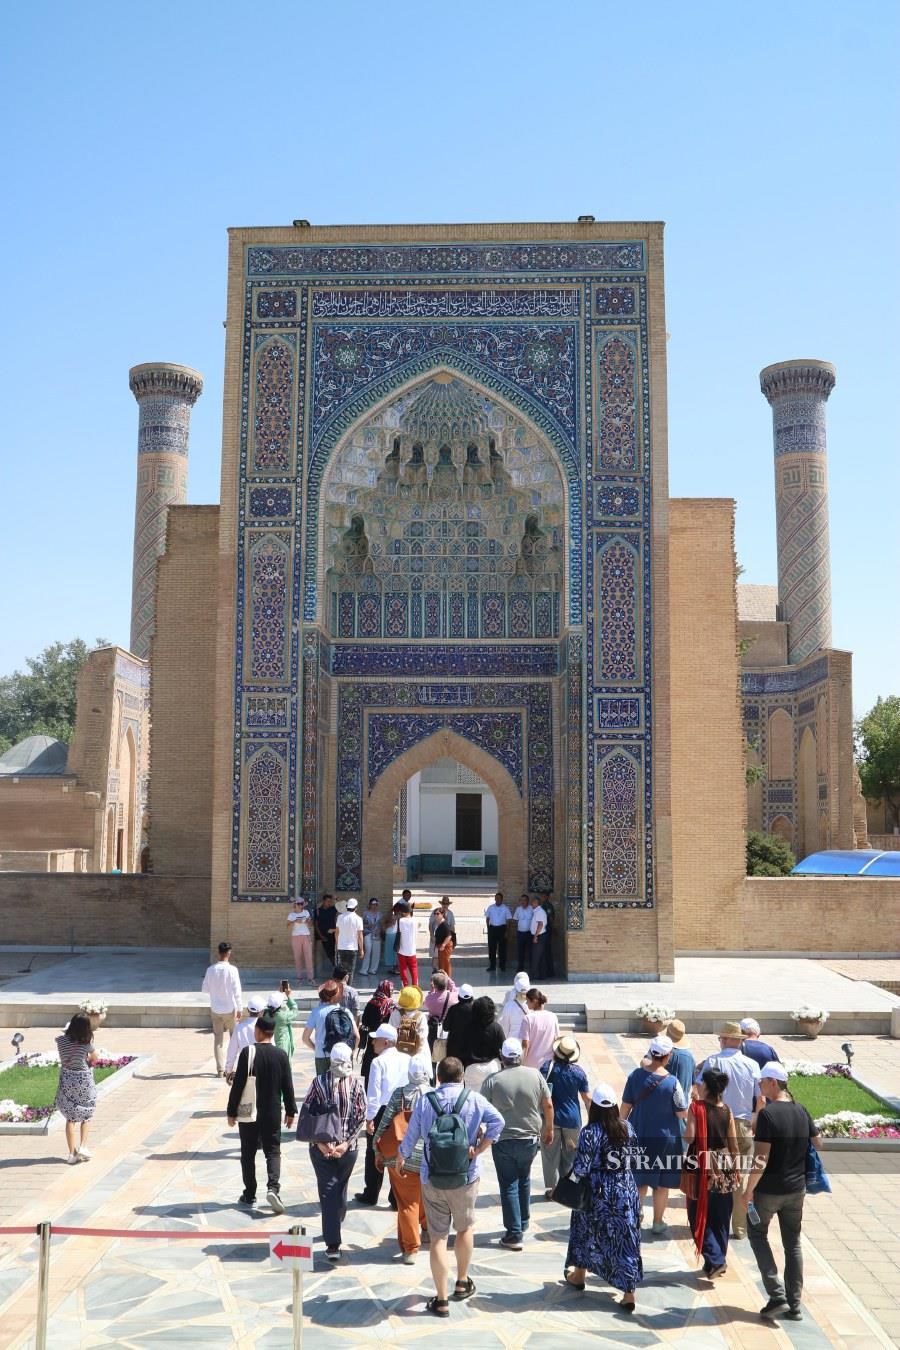  The entrance to one of the world's great sites of science, the 15th century Ulugh Beg Observatory in Samarkand.